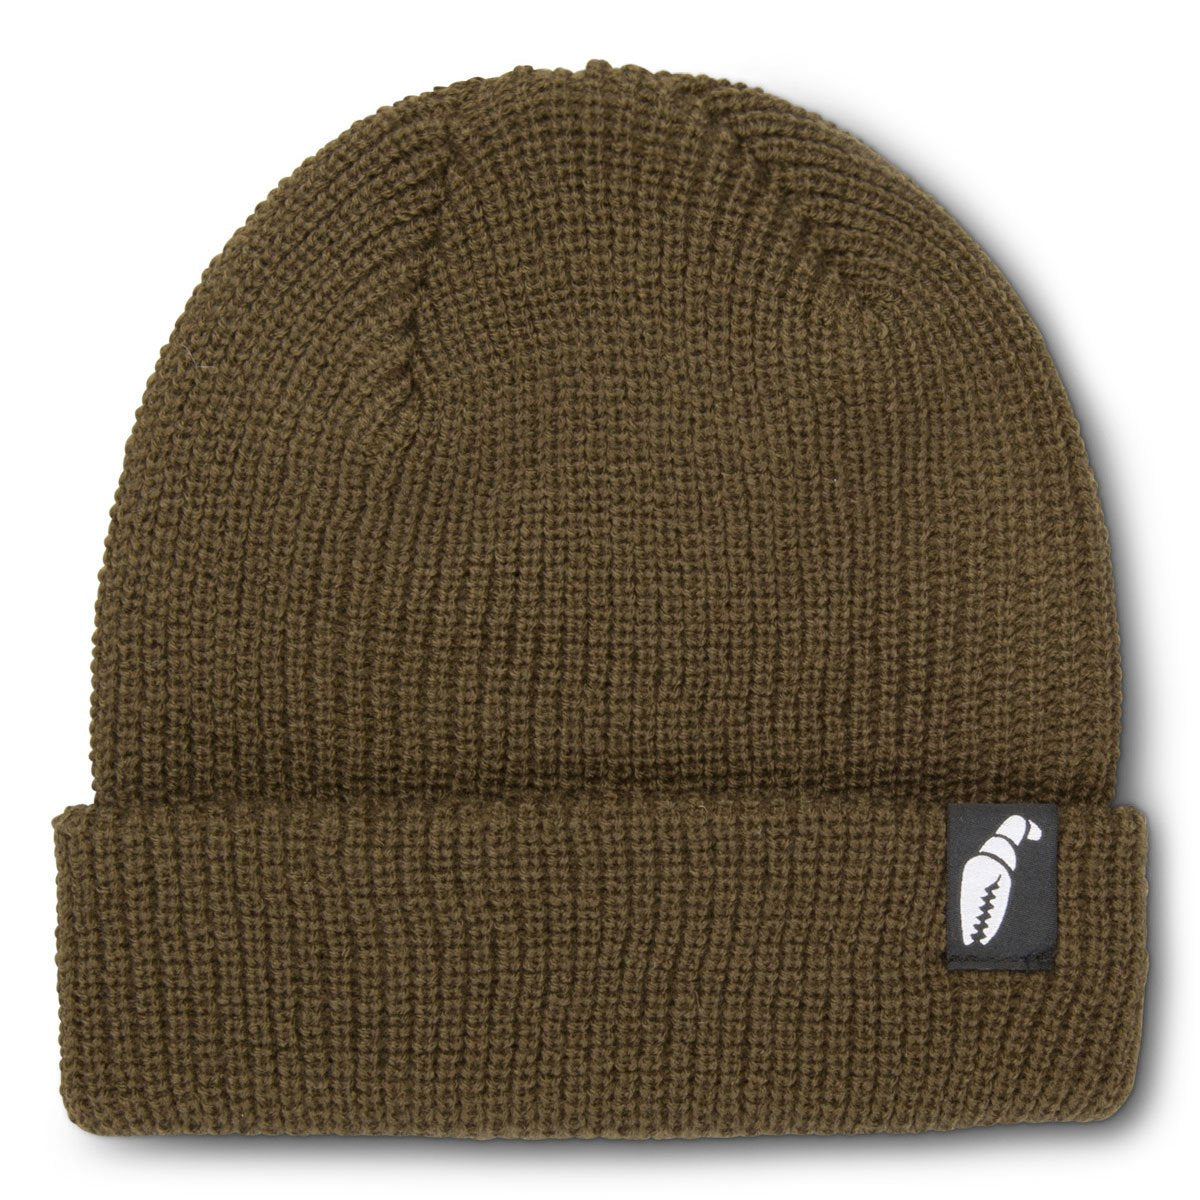 Crab Grab Claw Label Beanie - Brown image 1